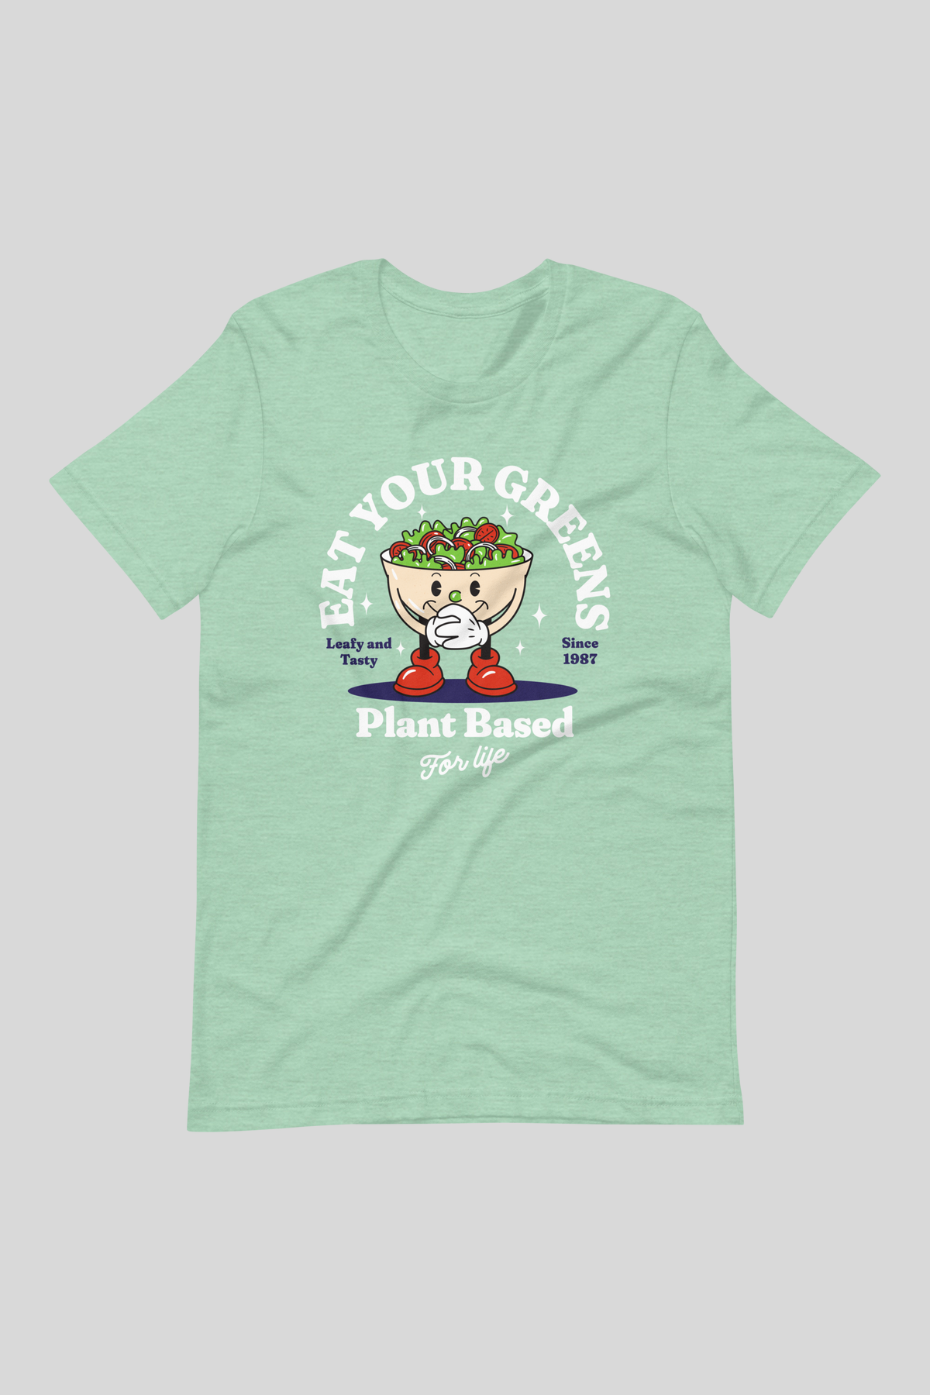 Eat Your Greens Unisex t-shirt